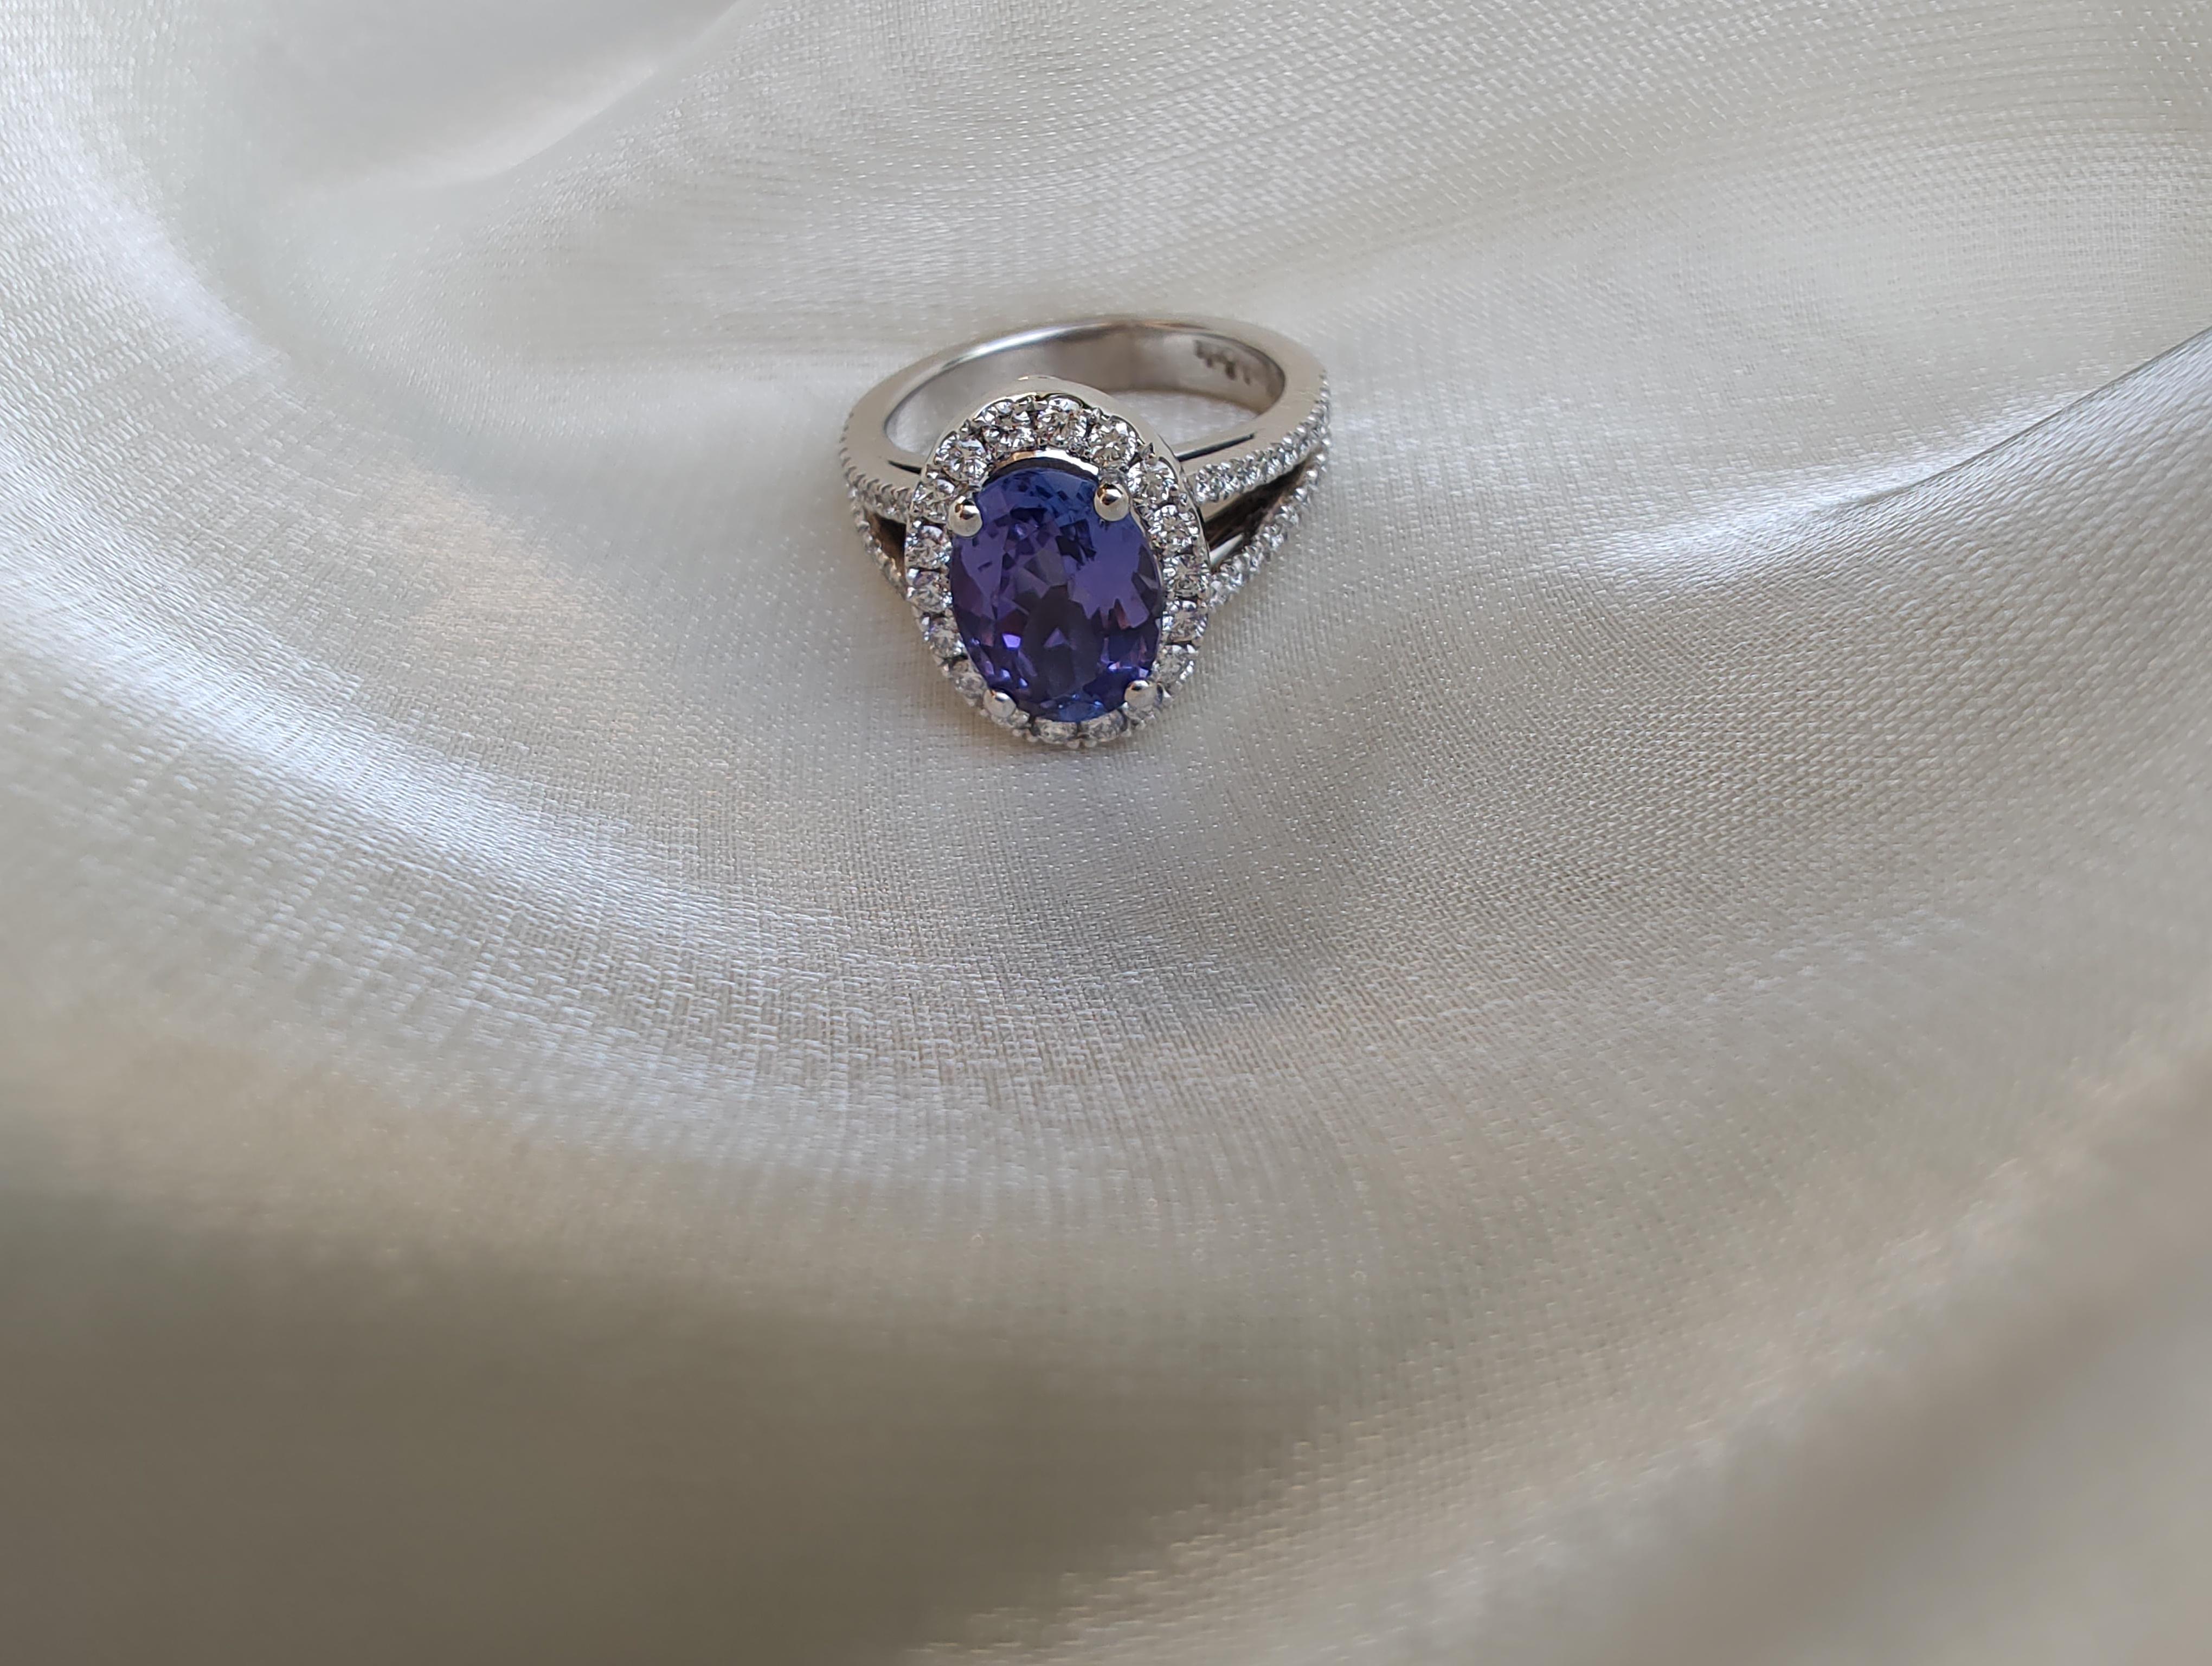 Handcrafted in 18ct white gold natural, luxurious, oval bluish-purple Tanzanite AAA Grade at 2.14cts and diamond halo cocktail ring.
Every Euphoria Jewels item is one of a kind and will arrive with a Certificate of Authenticity

D58 = .78ct E/VS1